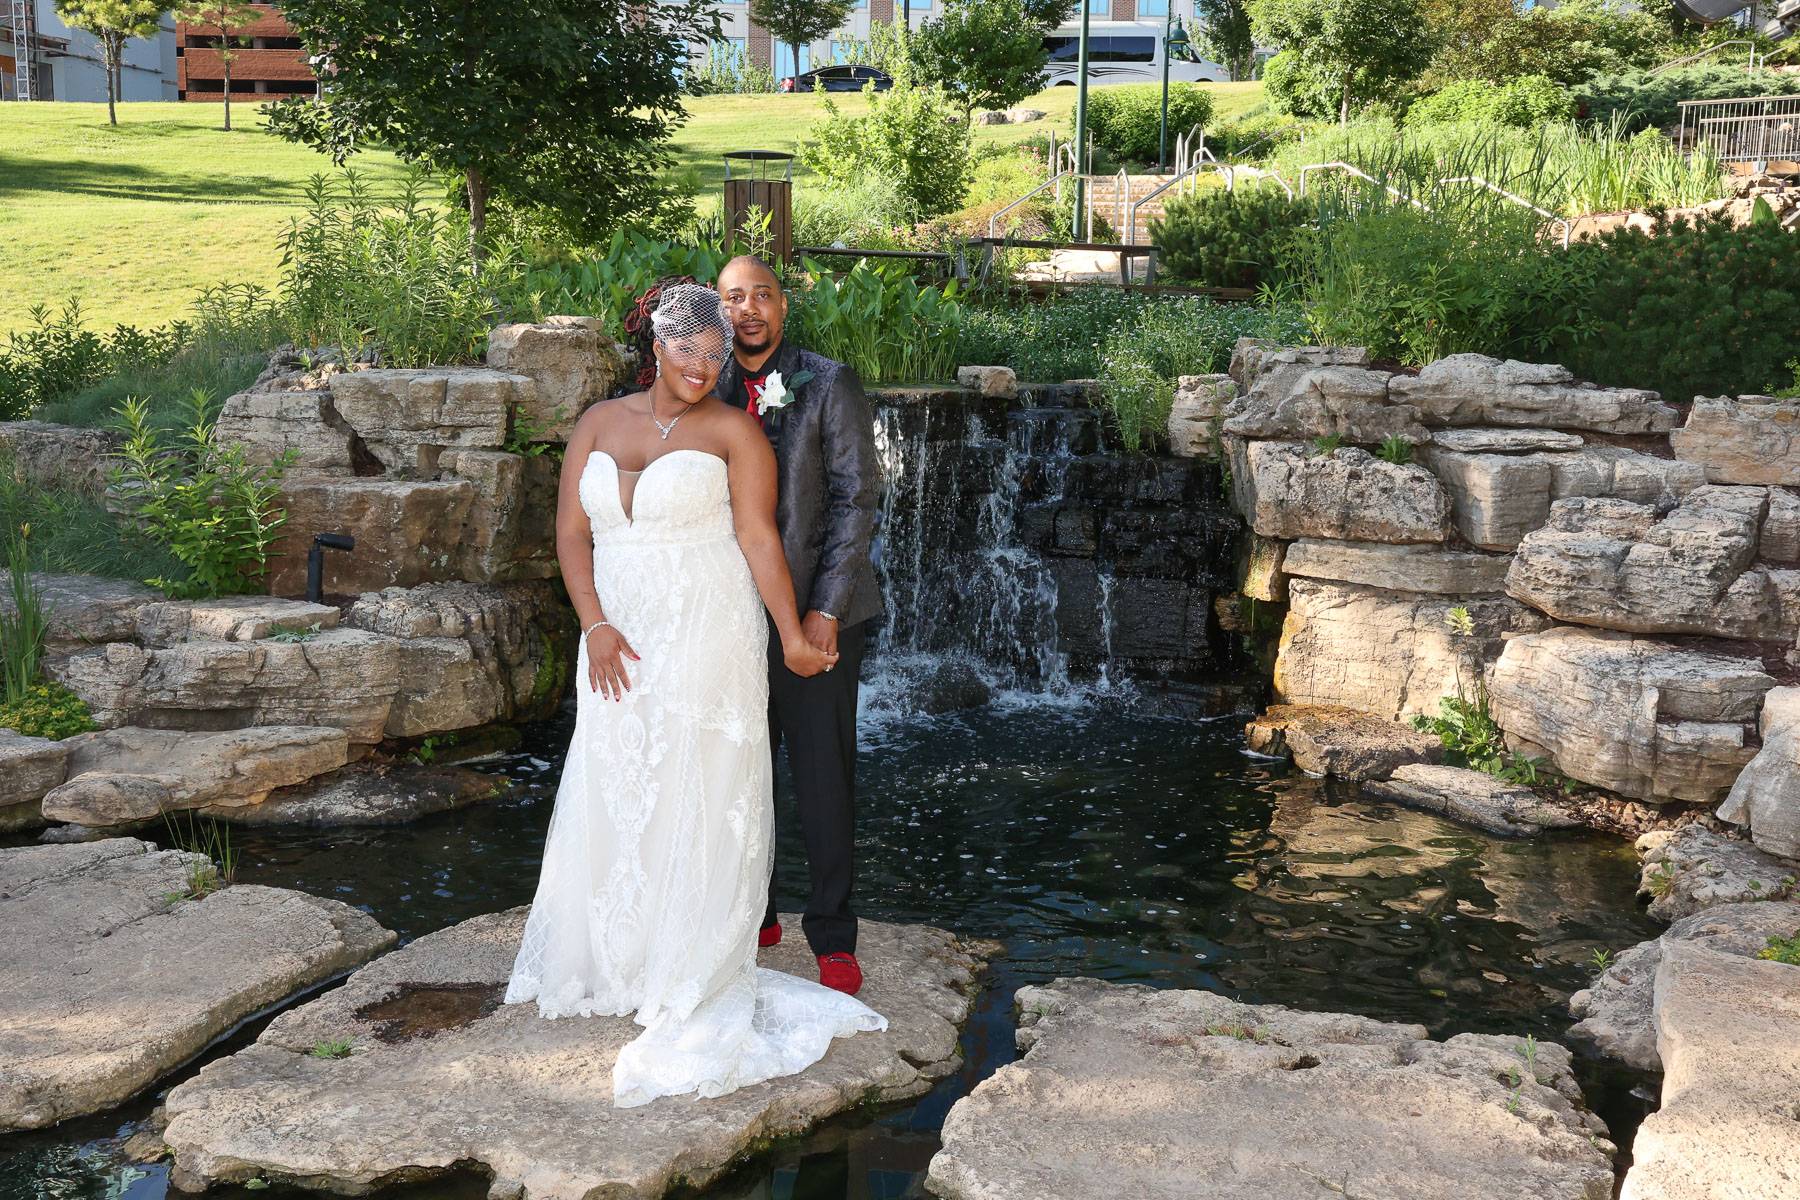 The bride and groom standing by a waterfall and pond